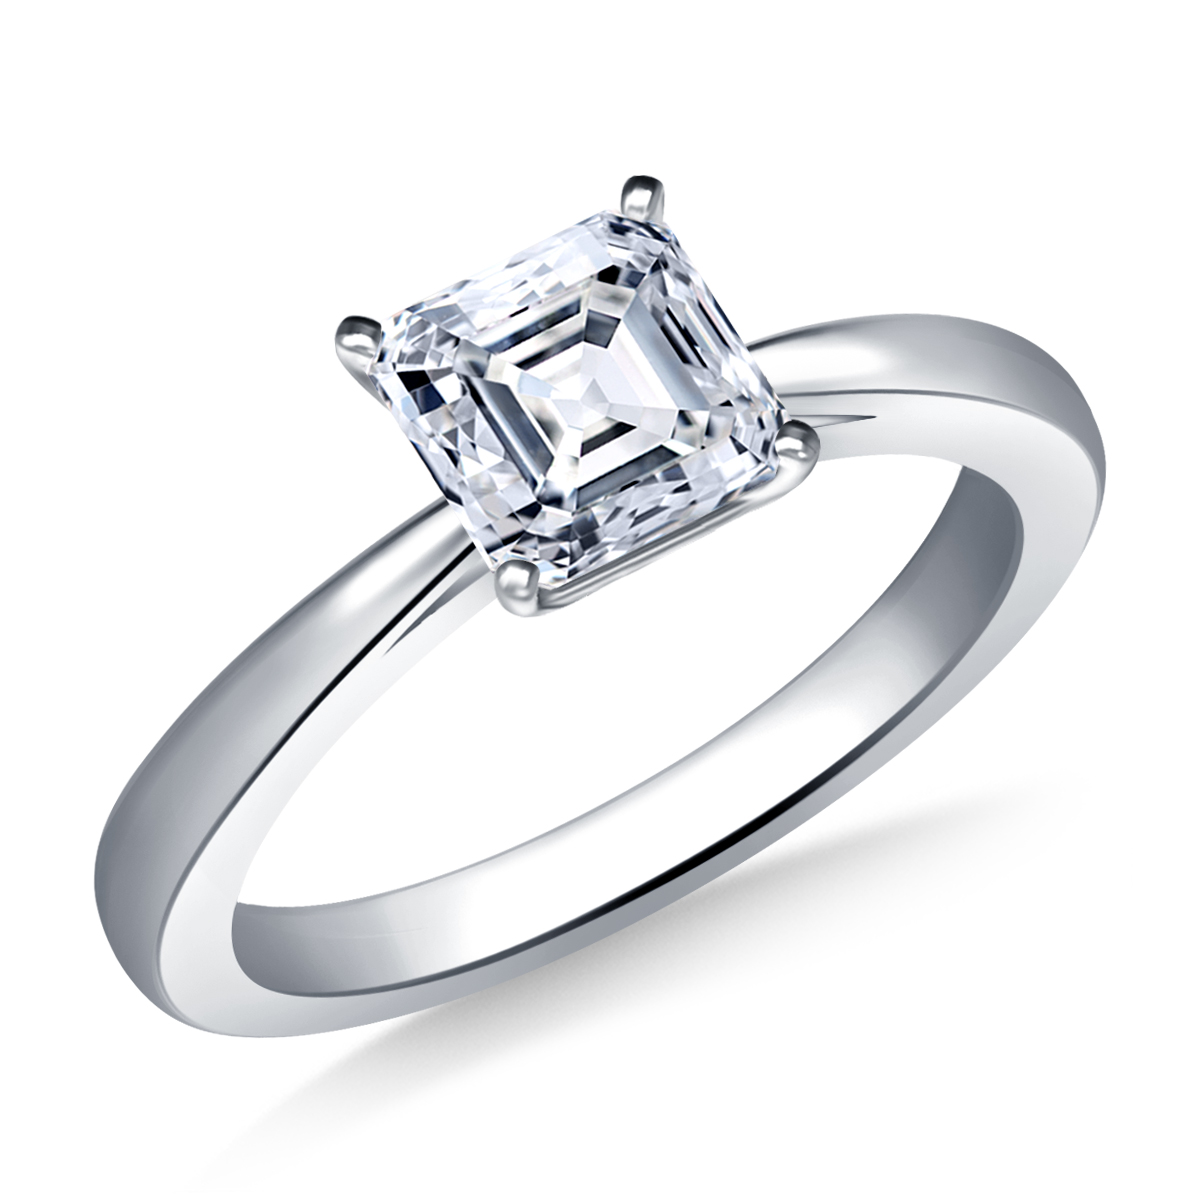 Reverse Tapered Classic Solitaire Diamond Engagement Ring in 14K White Gold (1.9 mm)